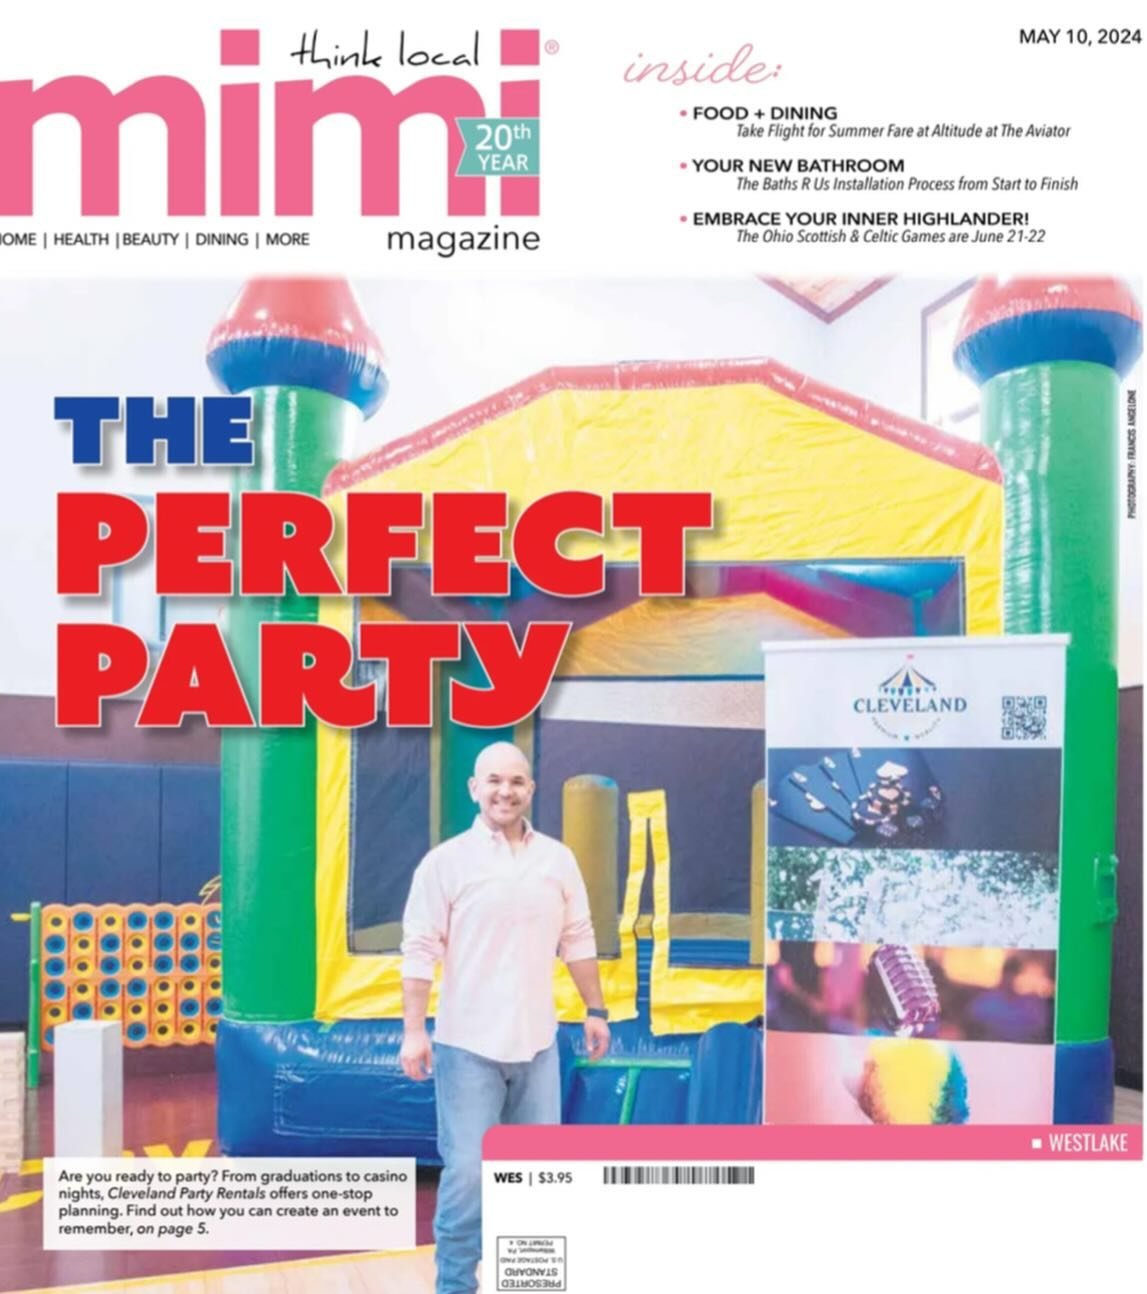 Just dropping this here for those not fortunate enough to be opening your mail to this handsome guy on the front page of Mimi magazine! 😂

Excellent coverage of Cleveland Party Rentals in Mimi Magazine this week.

Check us out at clevelandpartyrenta